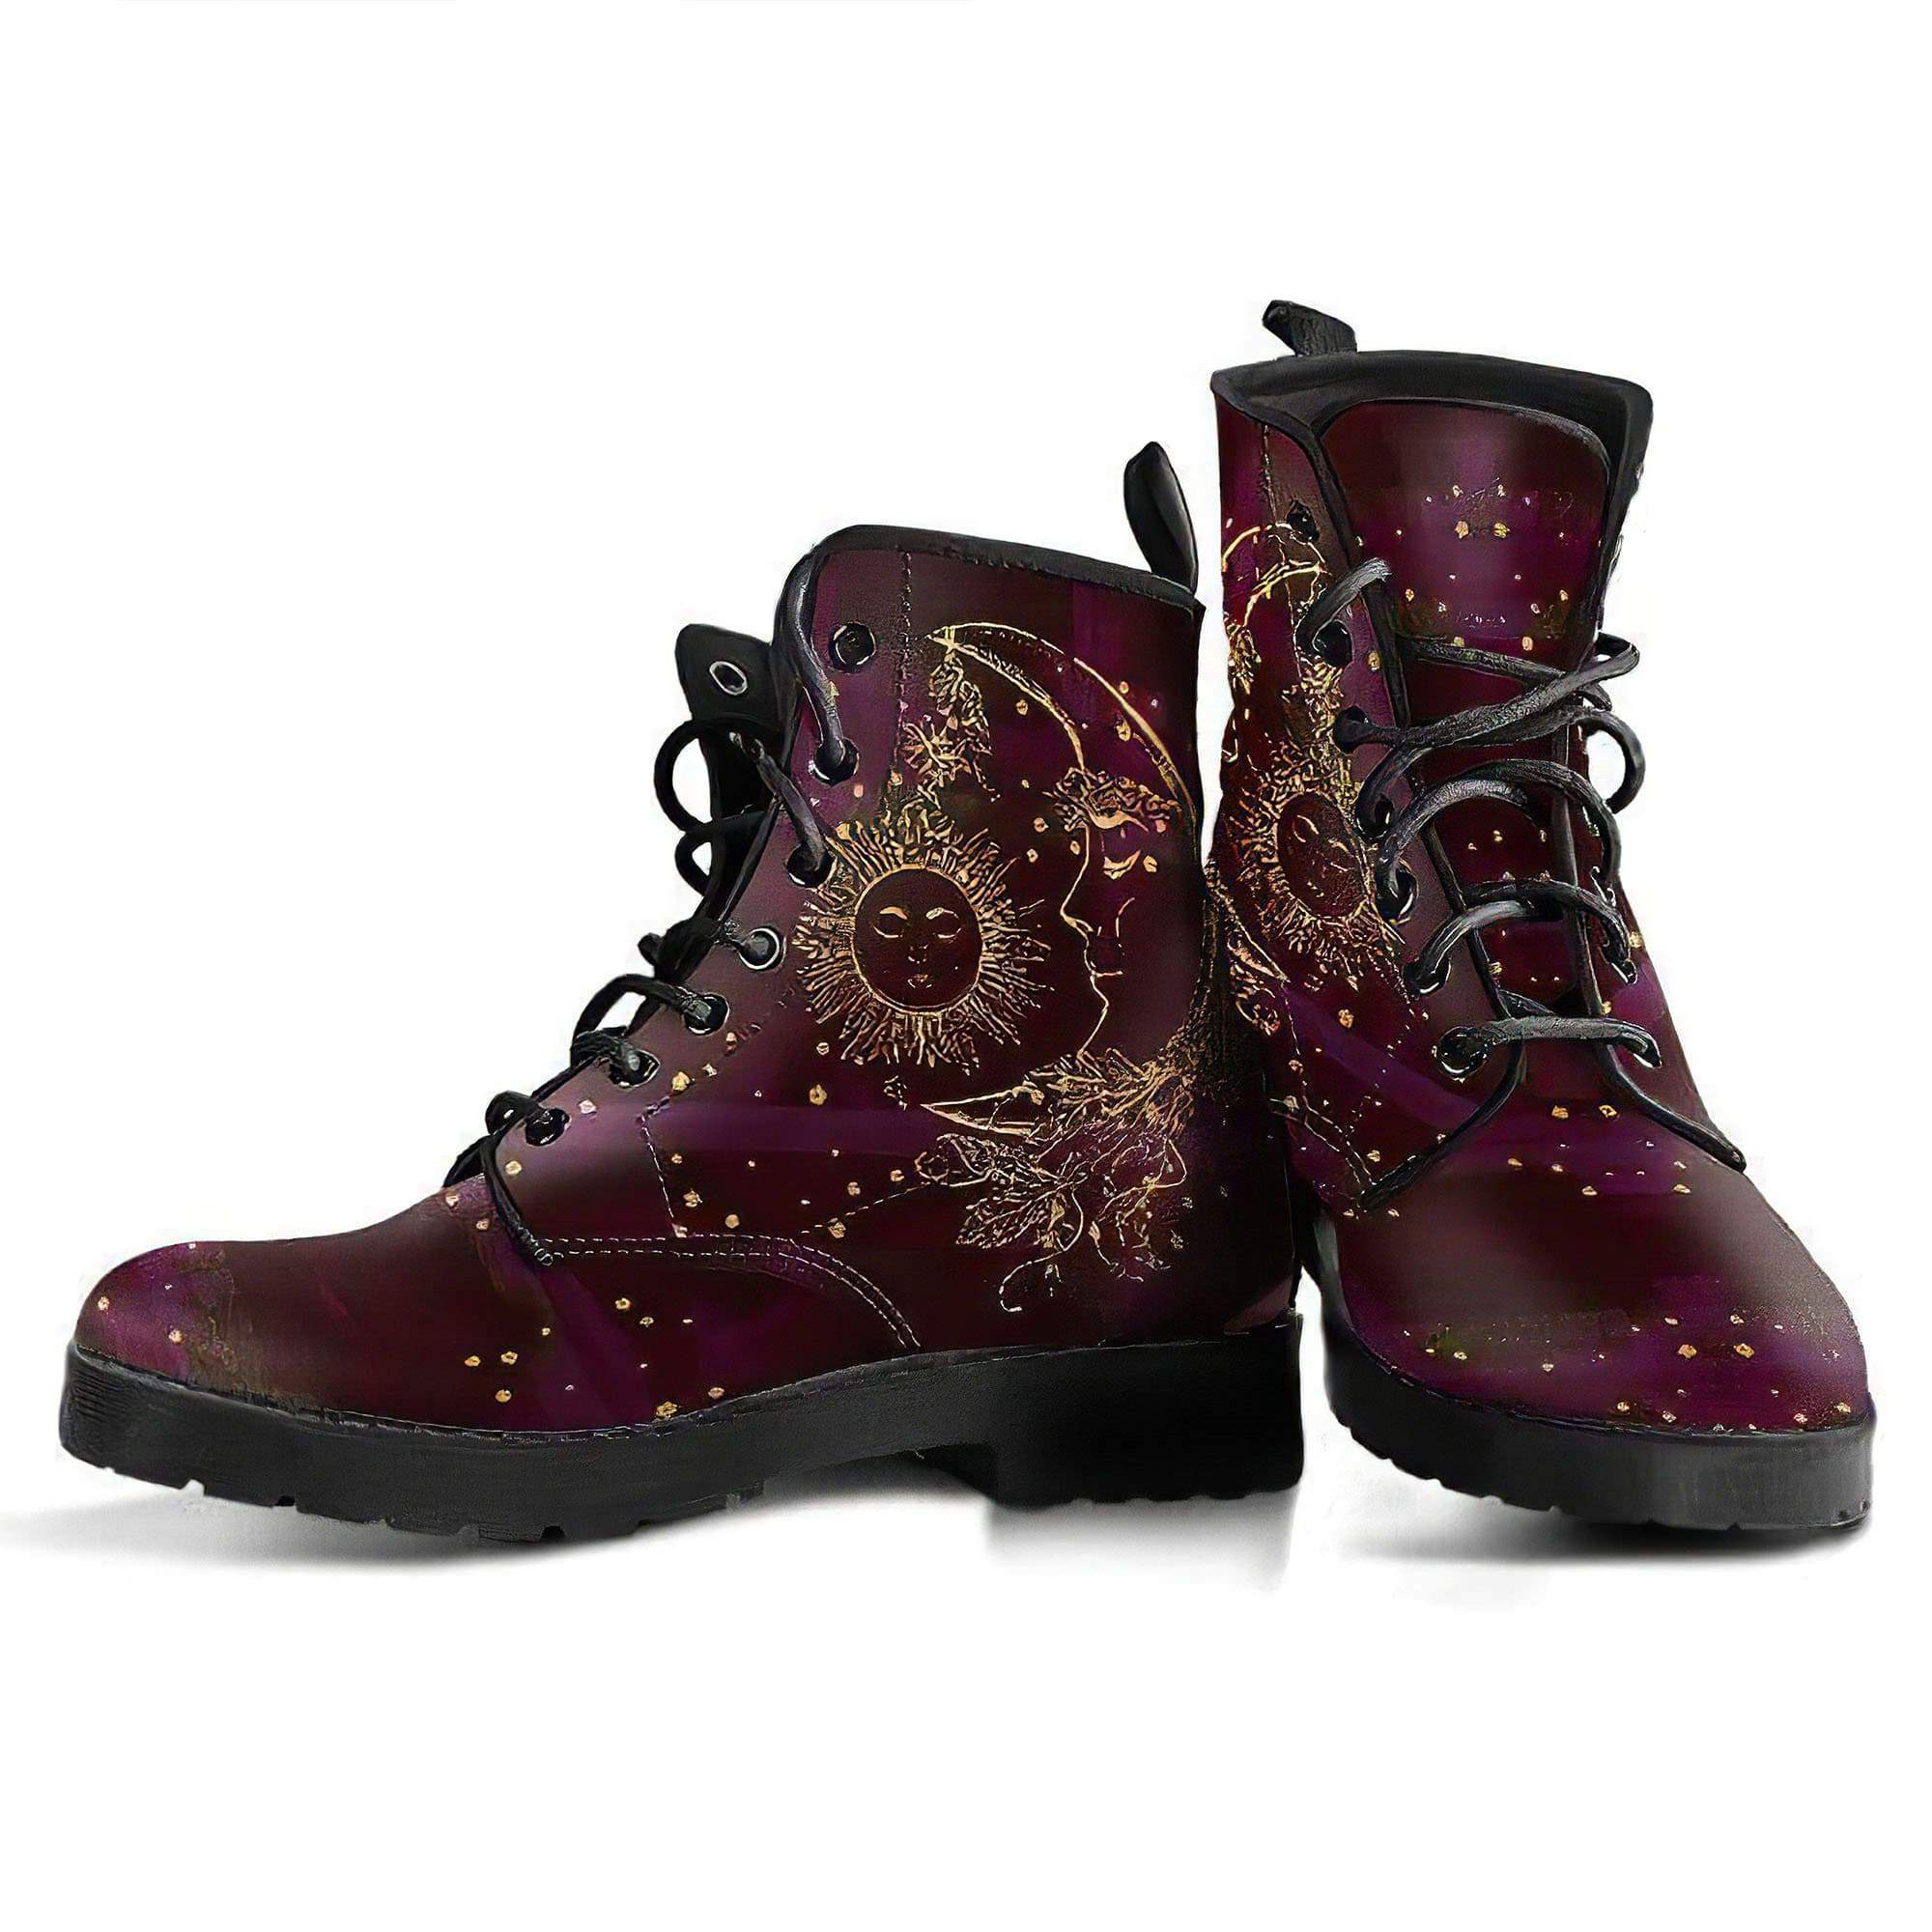 maroon-sun-and-moon-handcrafted-boots-women-s-leather-boots-12051909738557.jpg